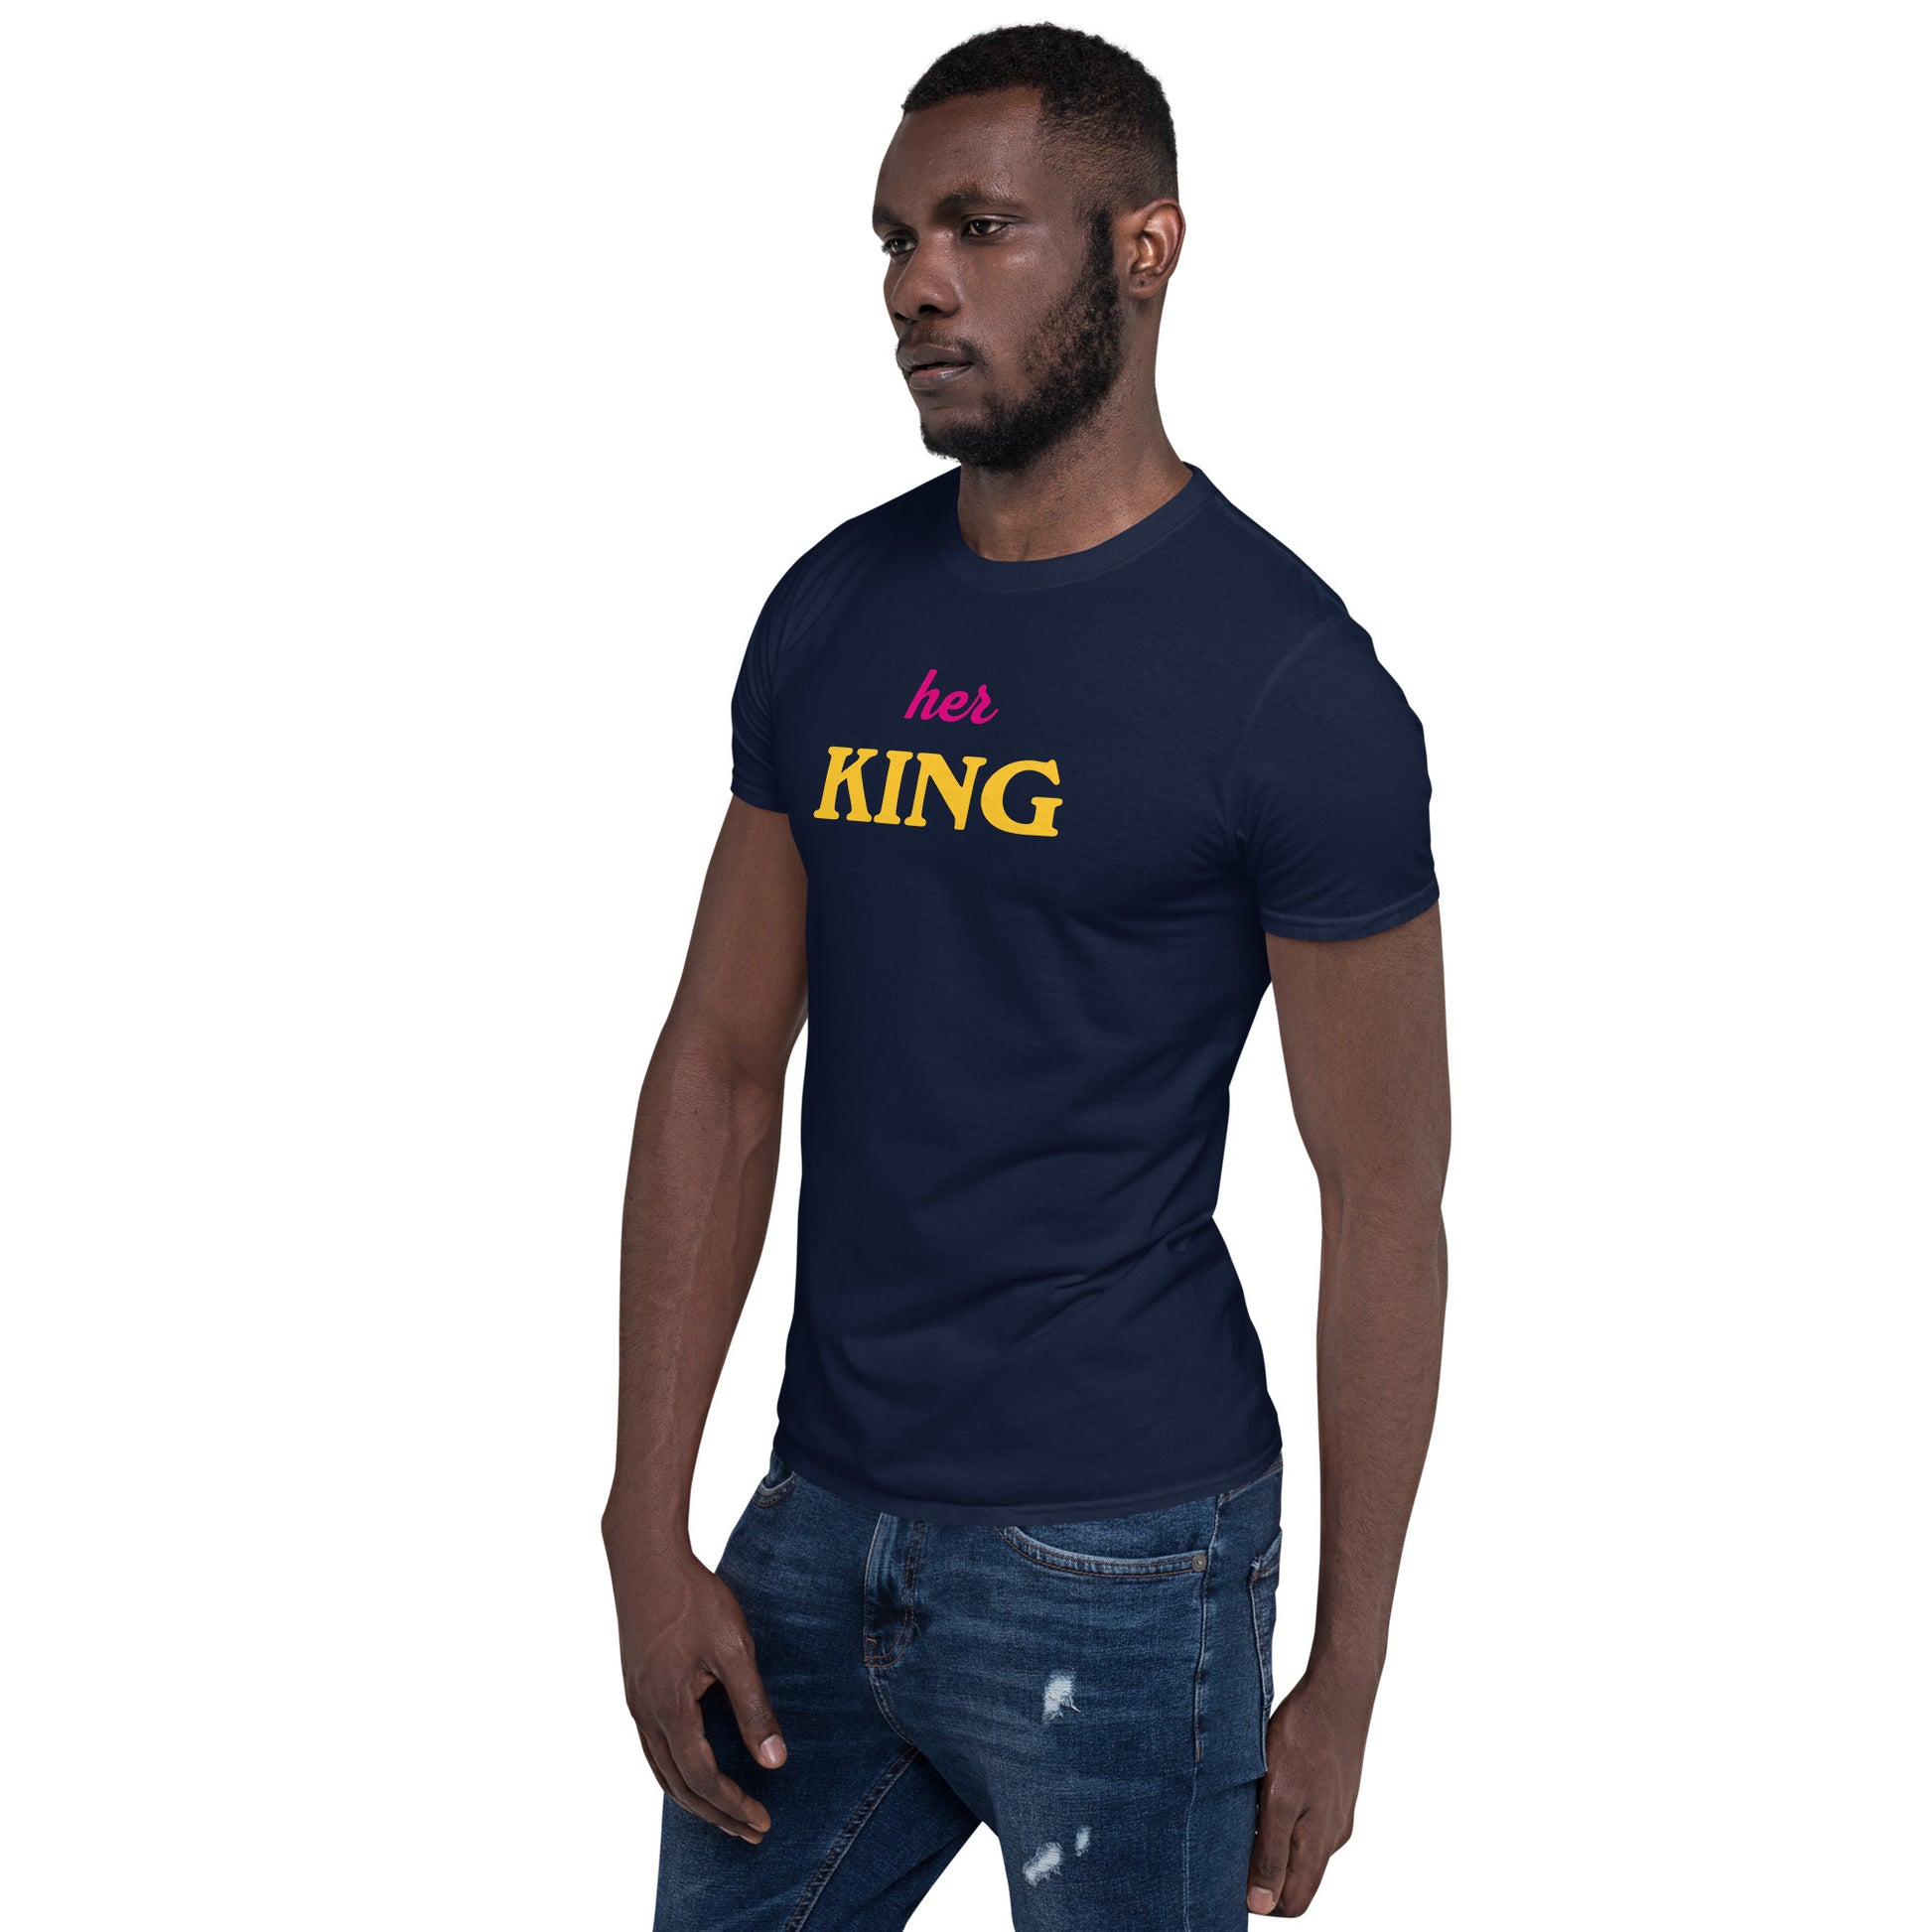 Her King Softstyle T-Shirt navy turn